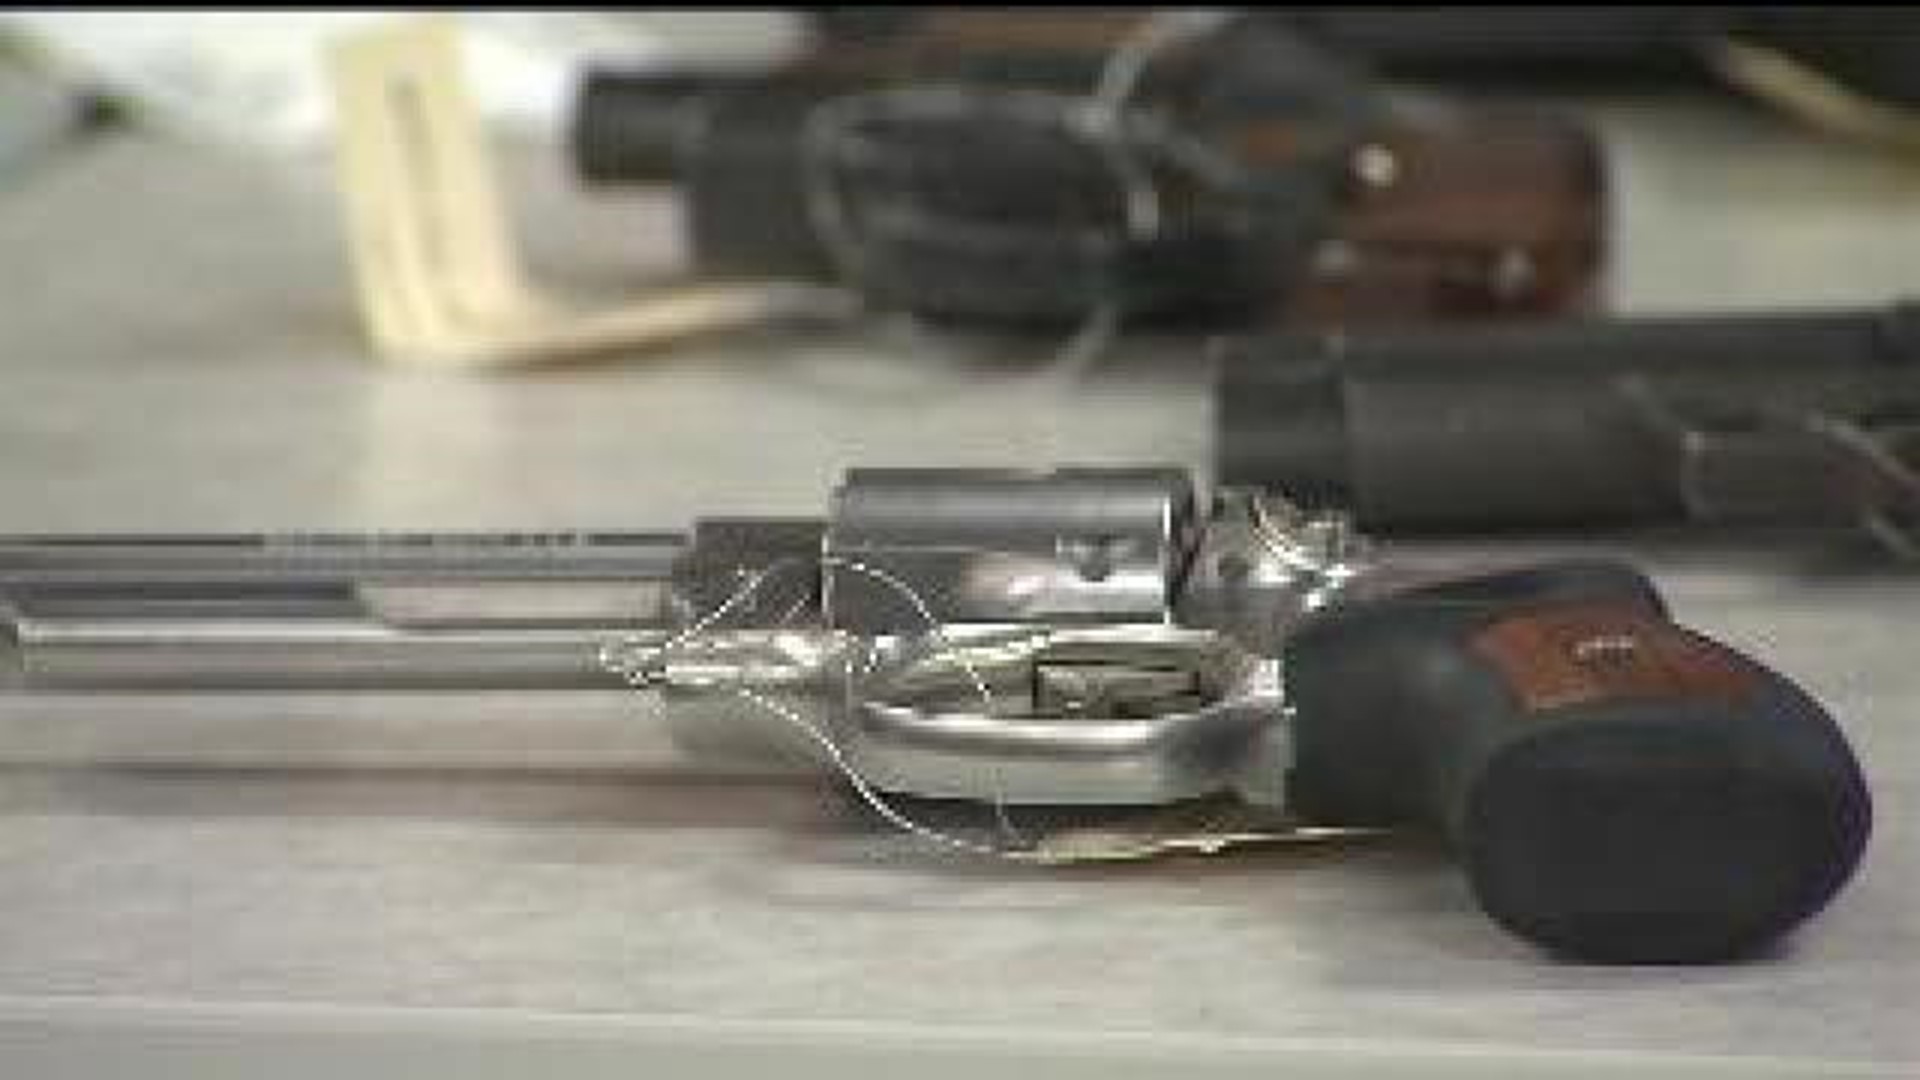 Iowa Law Allows Blind to Carry Guns